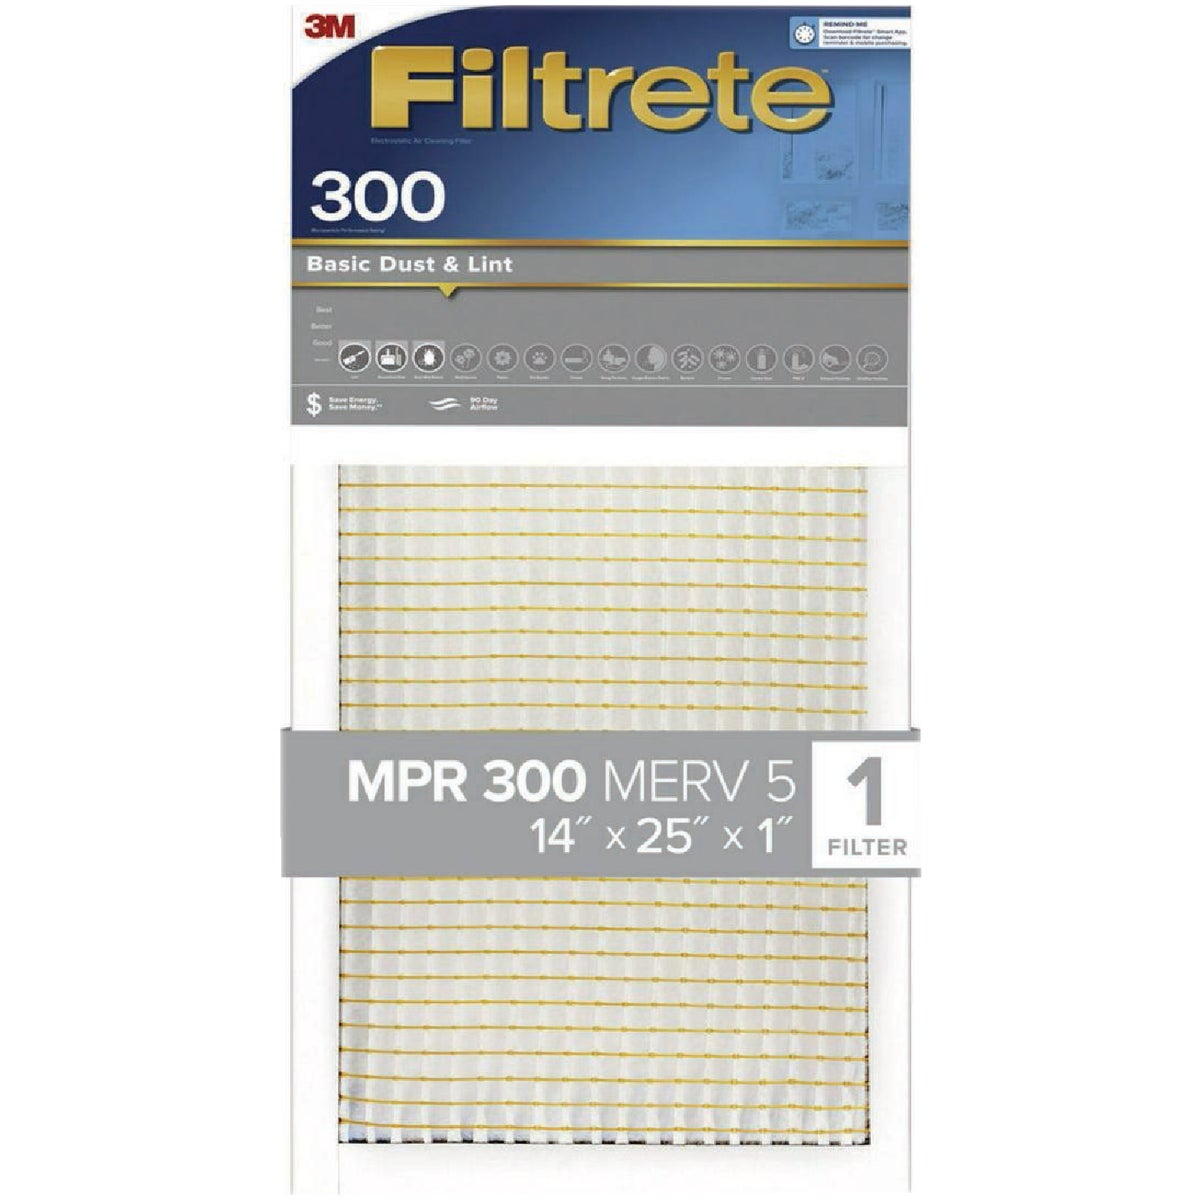 3M 304-4 3M Filtrete 14 In. x 25 In. x 1 In. Basic Dust & Lint 300 MPR Furnace Filter 304-4 Pack of 4